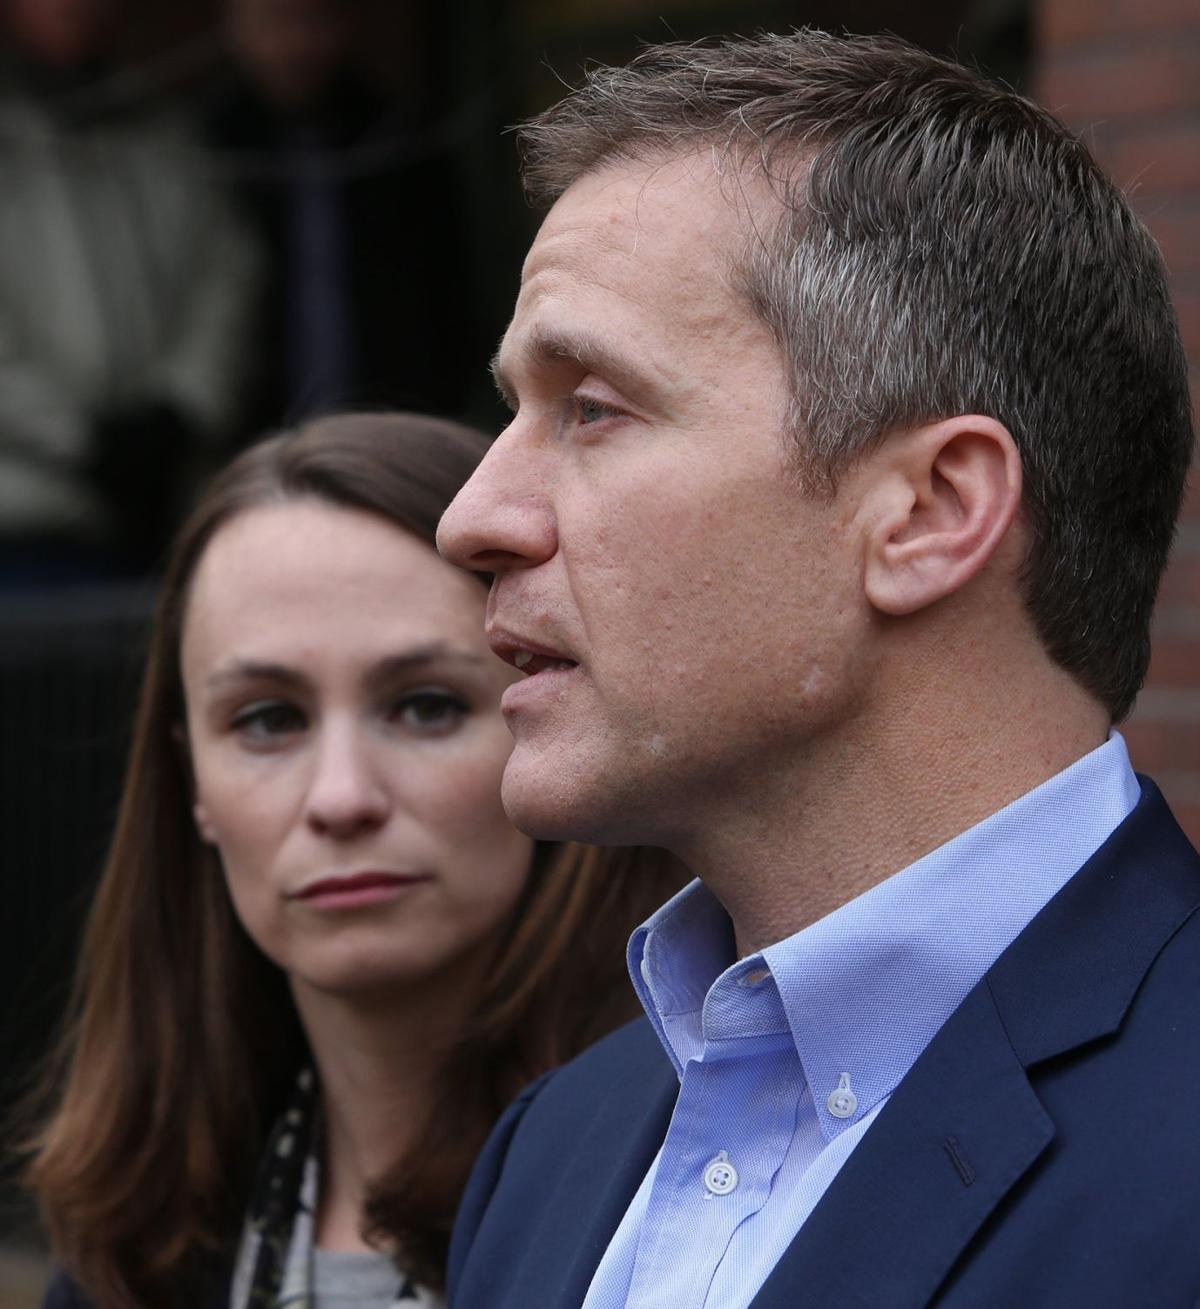 Timeline Of Events In Allegations Of Greitens Sexual Conduct